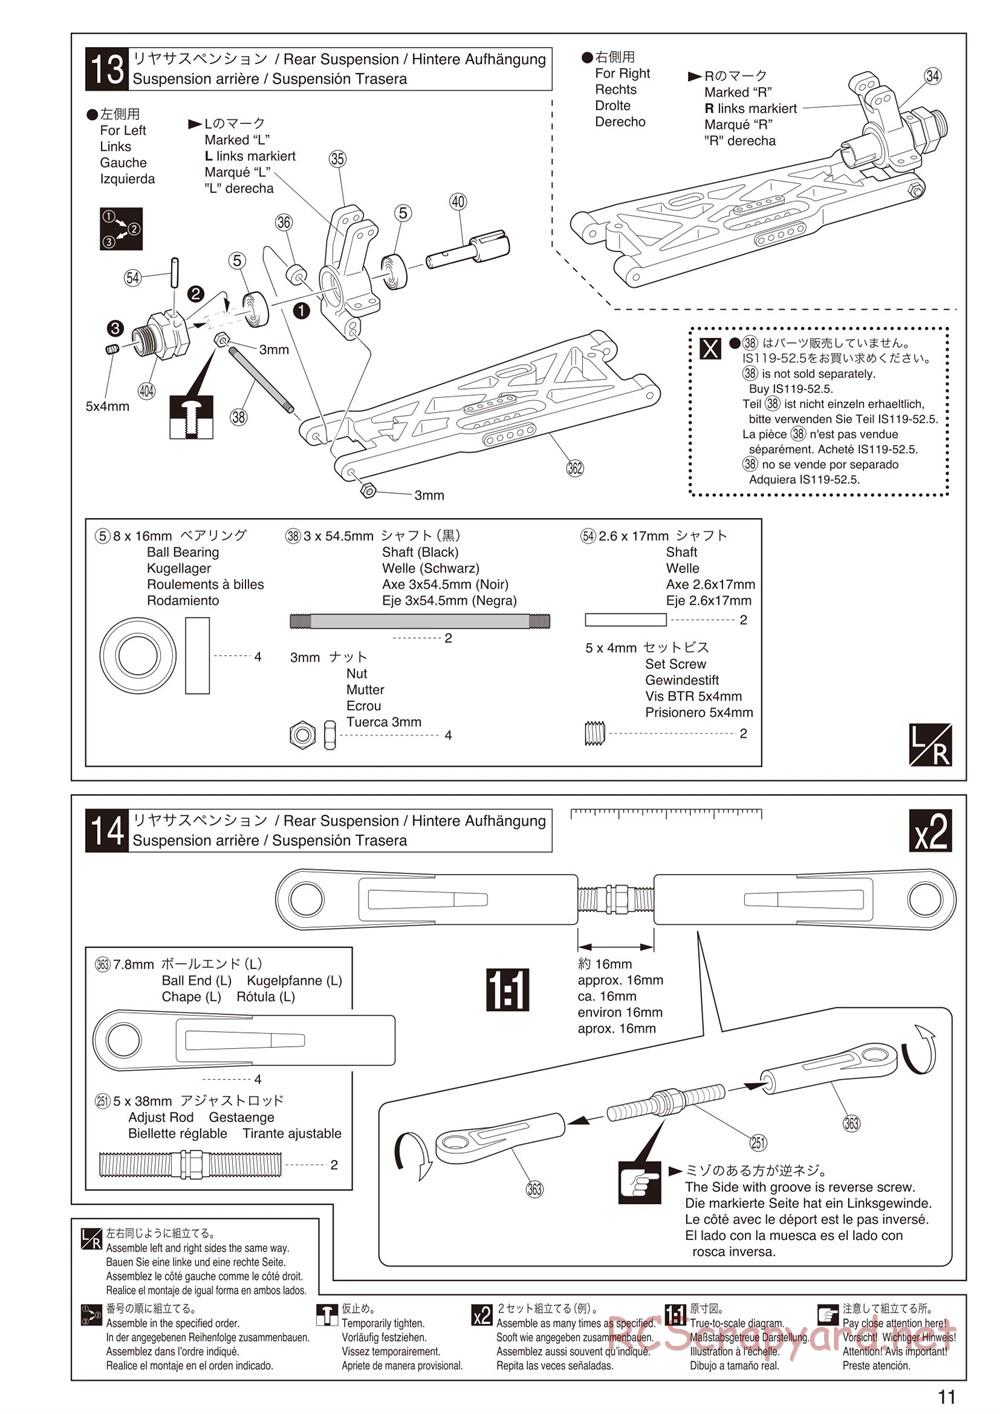 Kyosho - Inferno Neo ST - Manual - Page 11